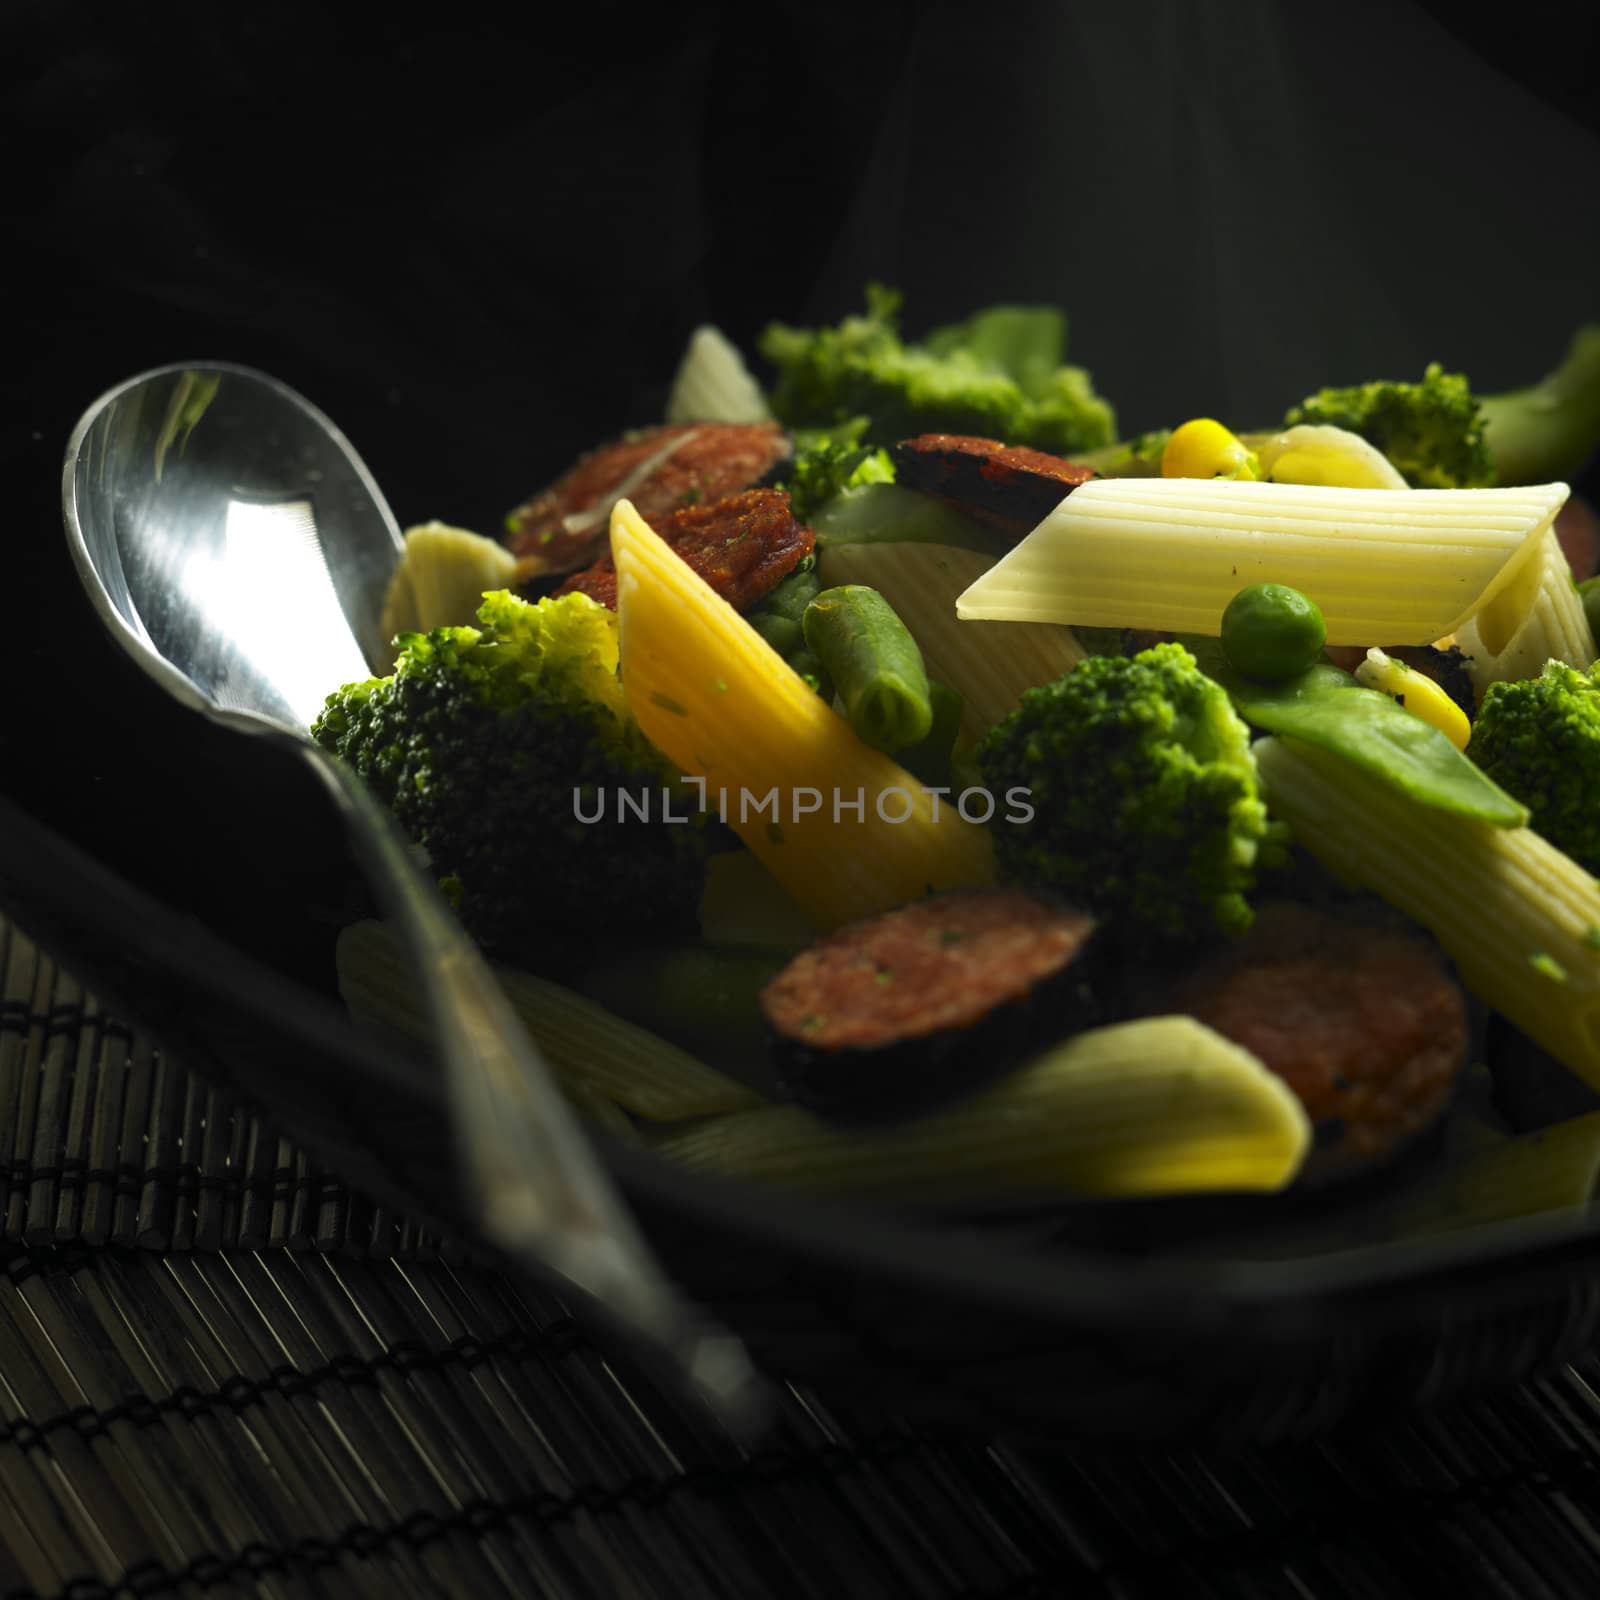 penne pasta with green vegetables and sausages by phbcz